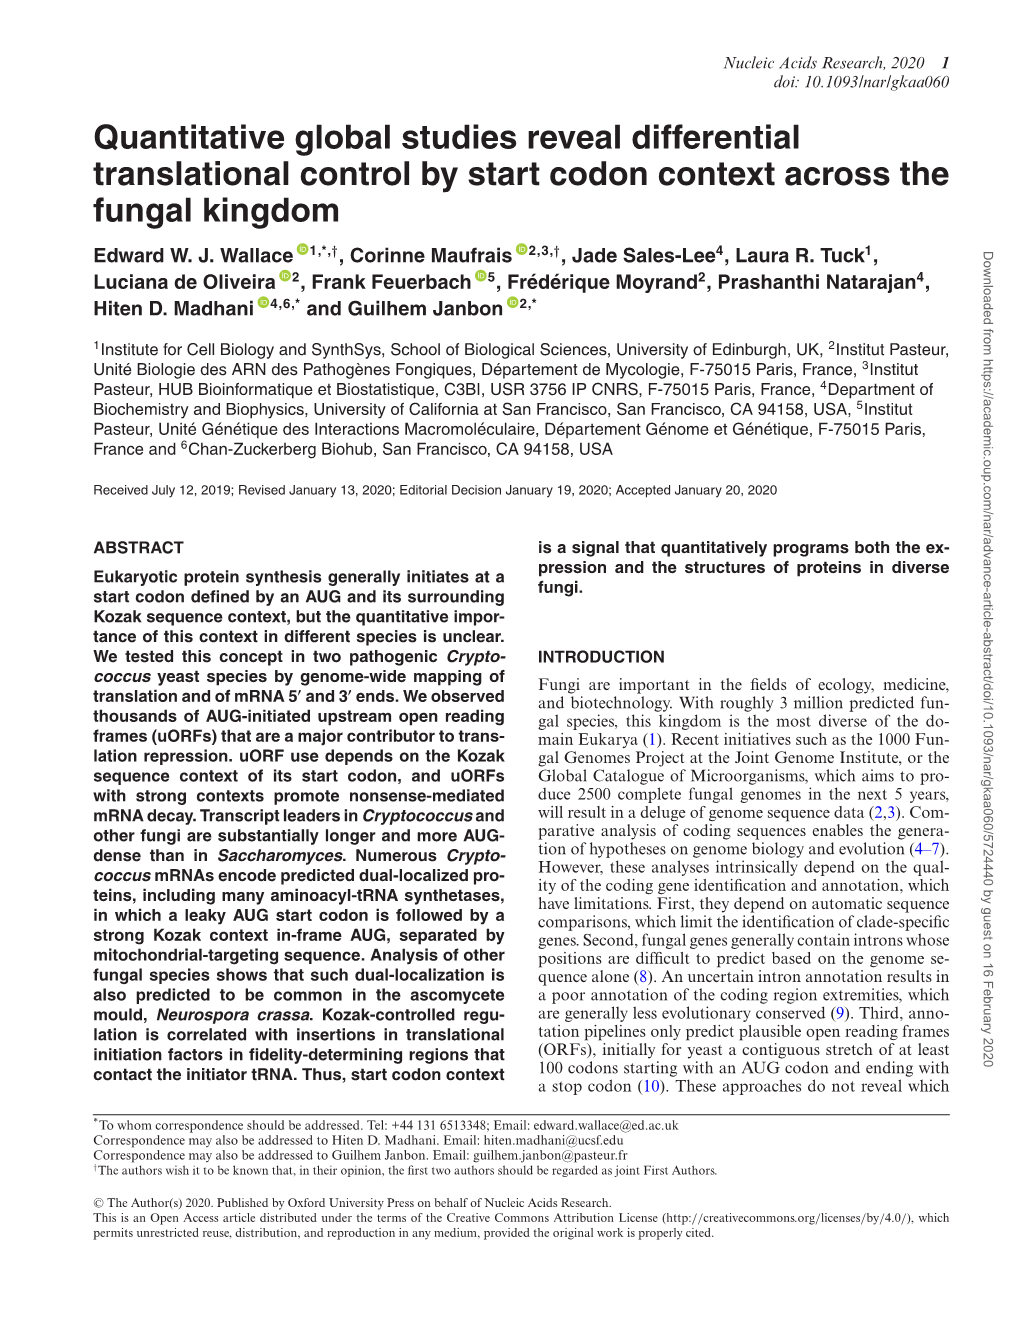 Quantitative Global Studies Reveal Differential Translational Control by Start Codon Context Across the Fungal Kingdom